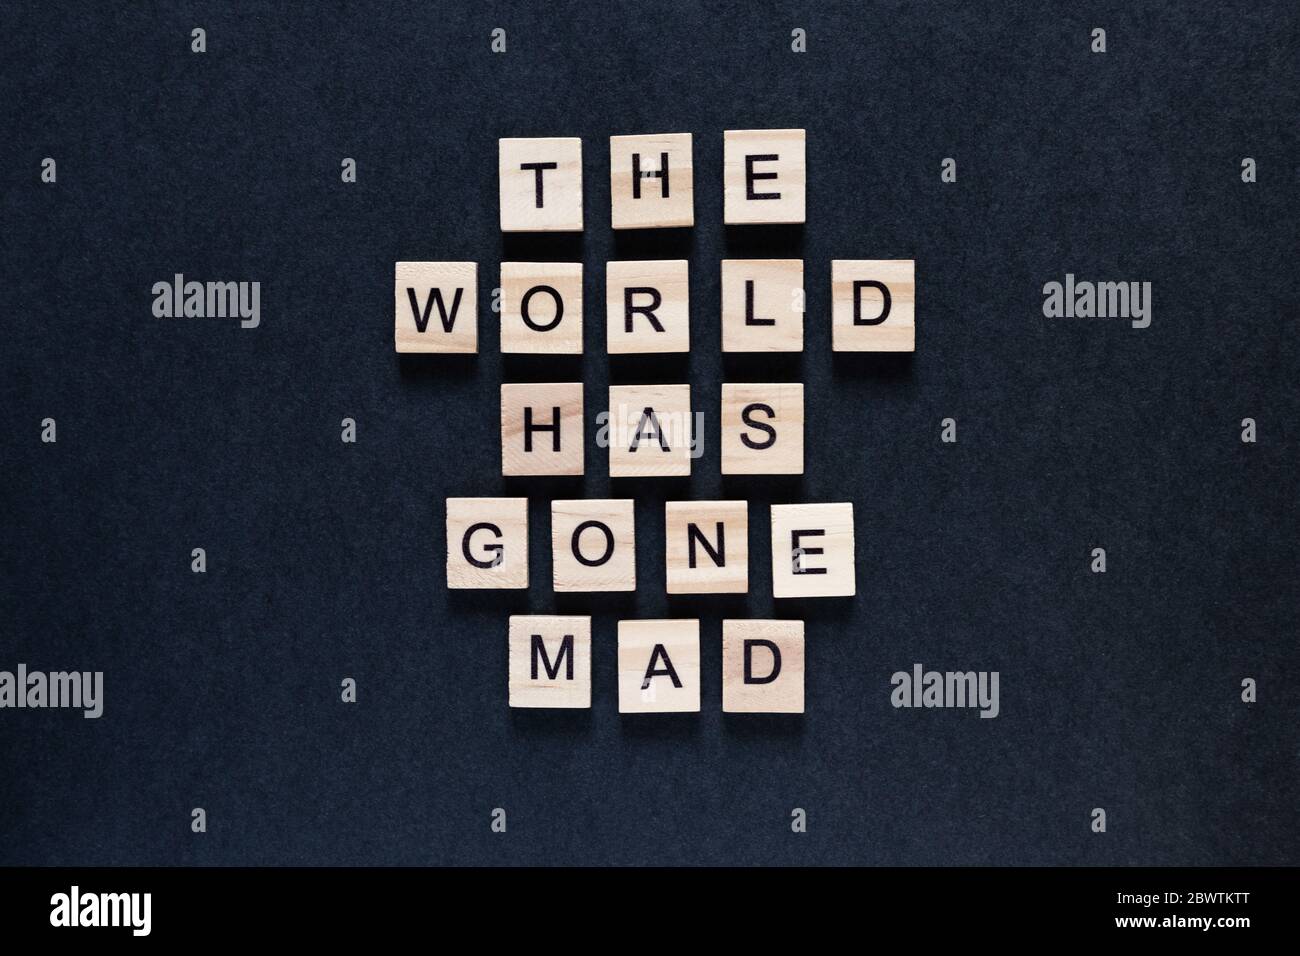 the world has gone mad an inscription on a black background Stock Photo